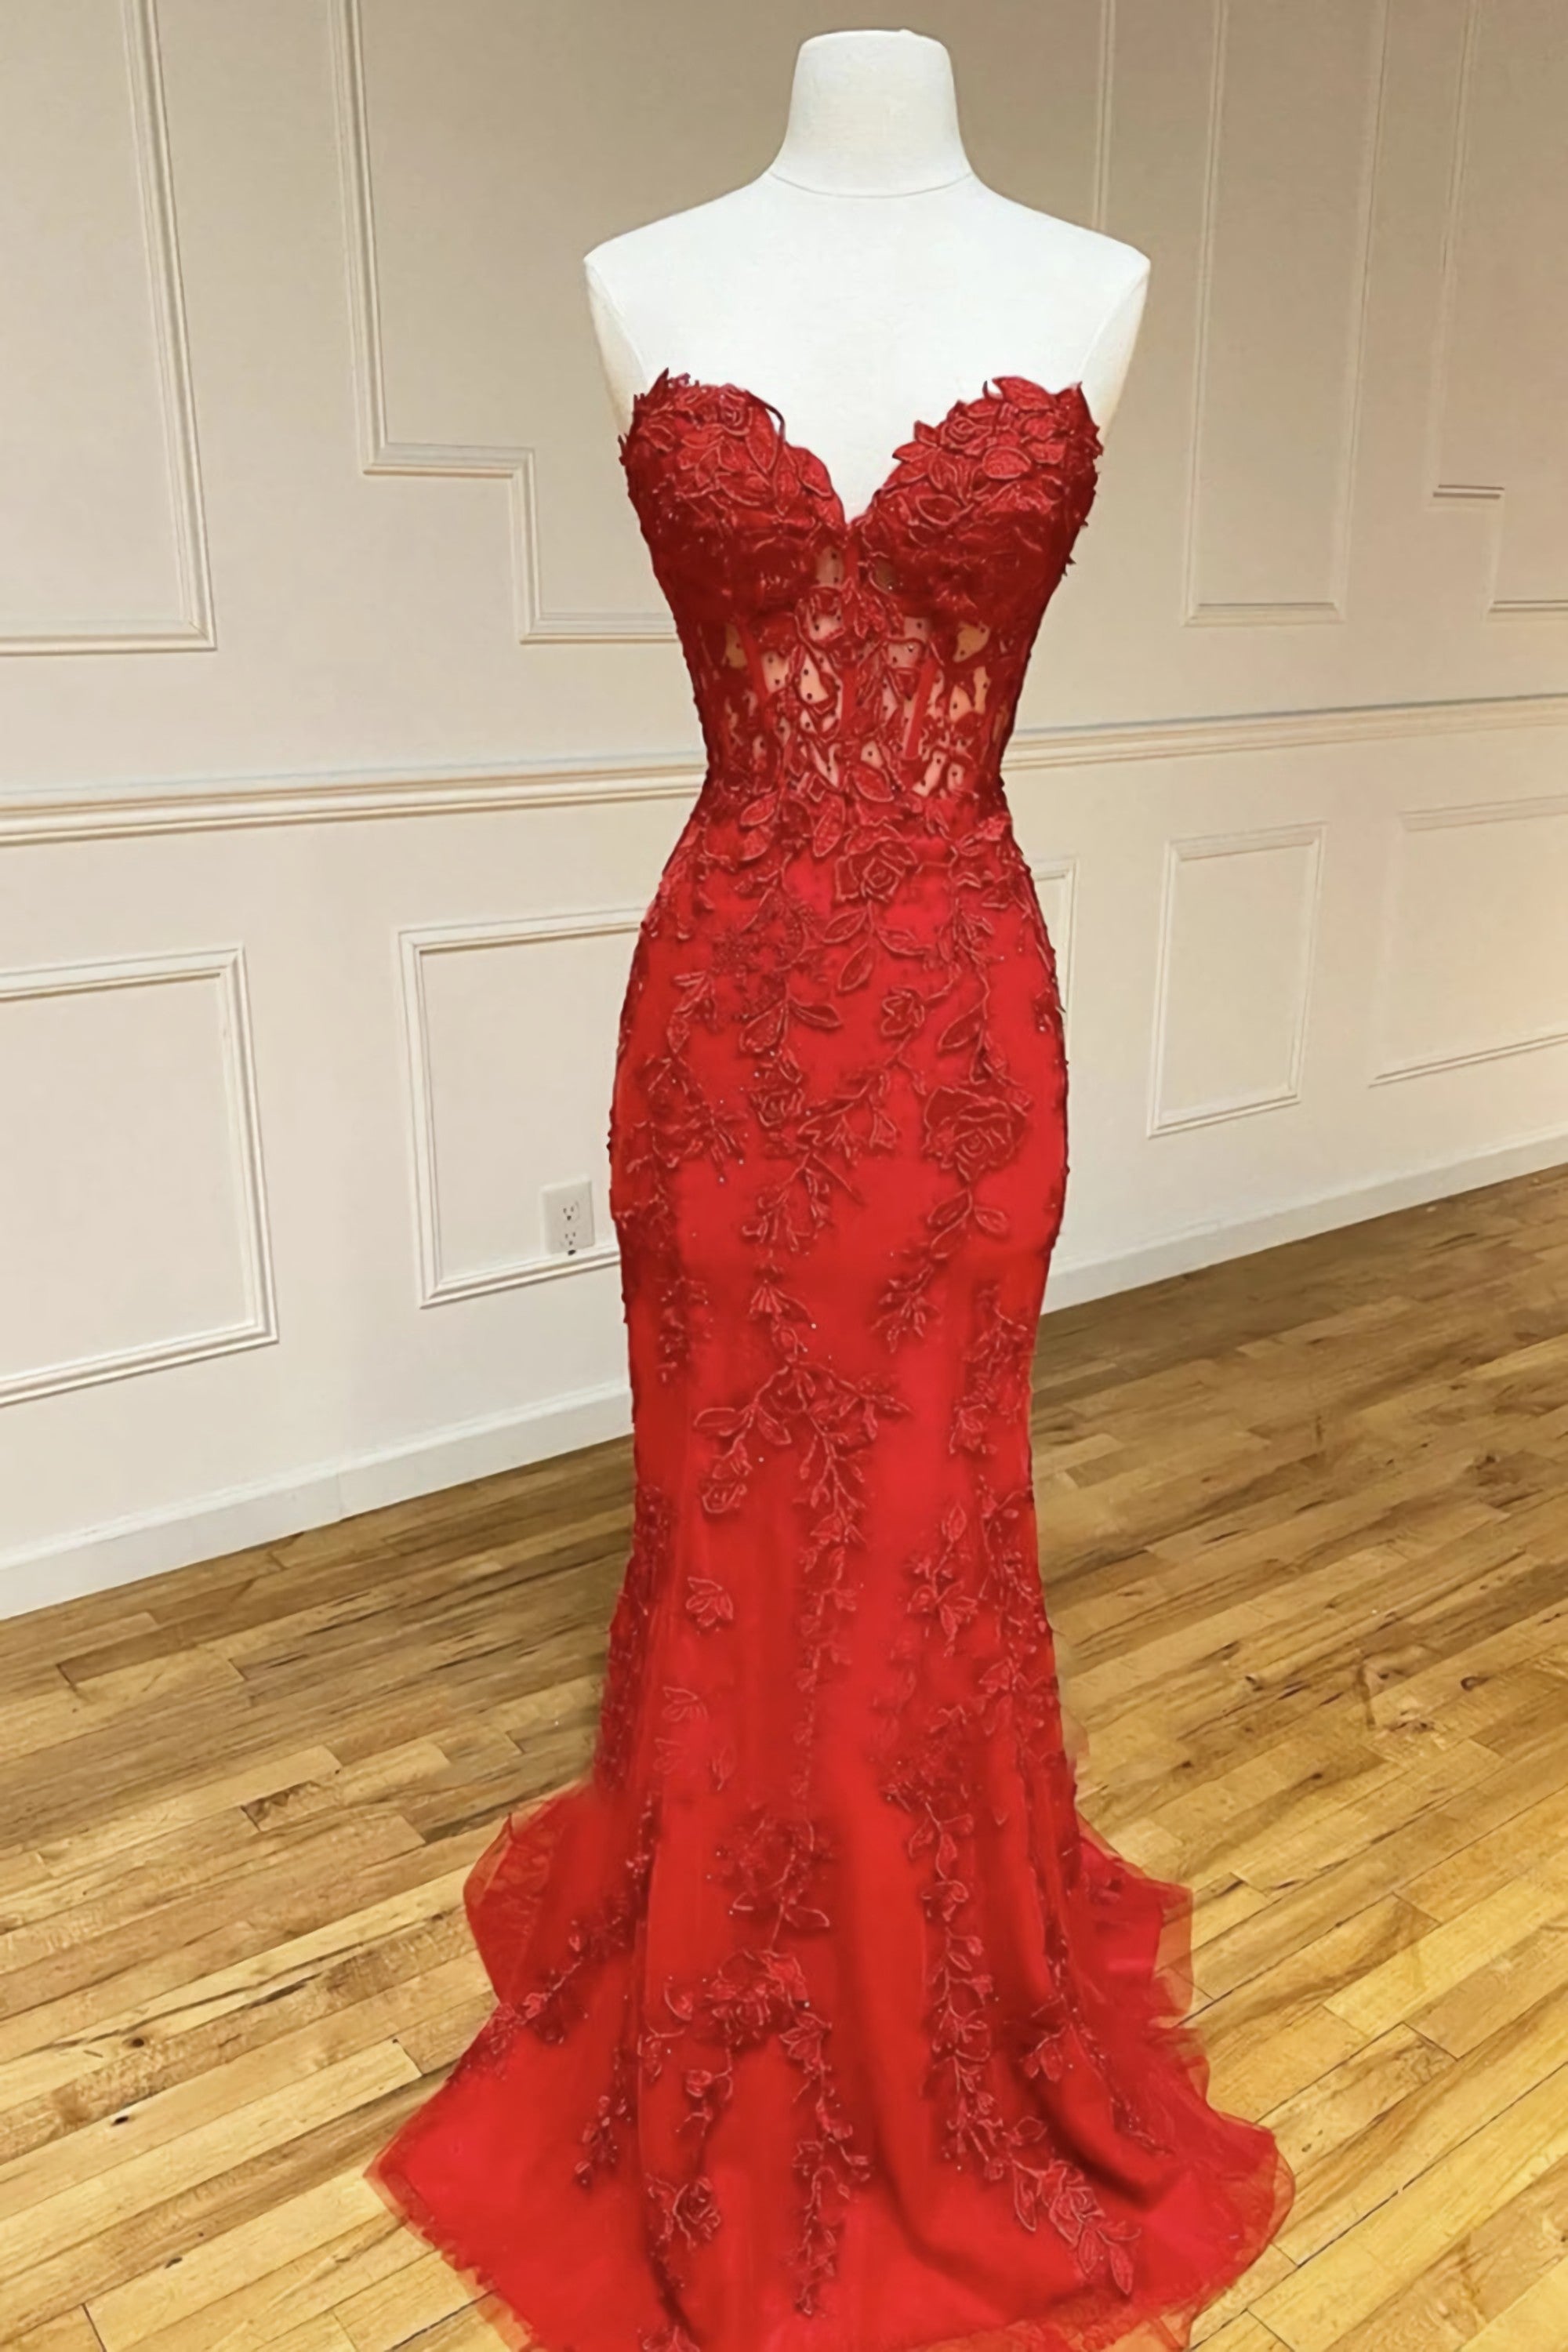 Strapless Sweetheart Neck Mermaid Red Lace Long Corset Prom Dress, Mermaid Red Lace Corset Formal Dress, Red Lace Evening Dress outfit, Formal Dresses And Gowns